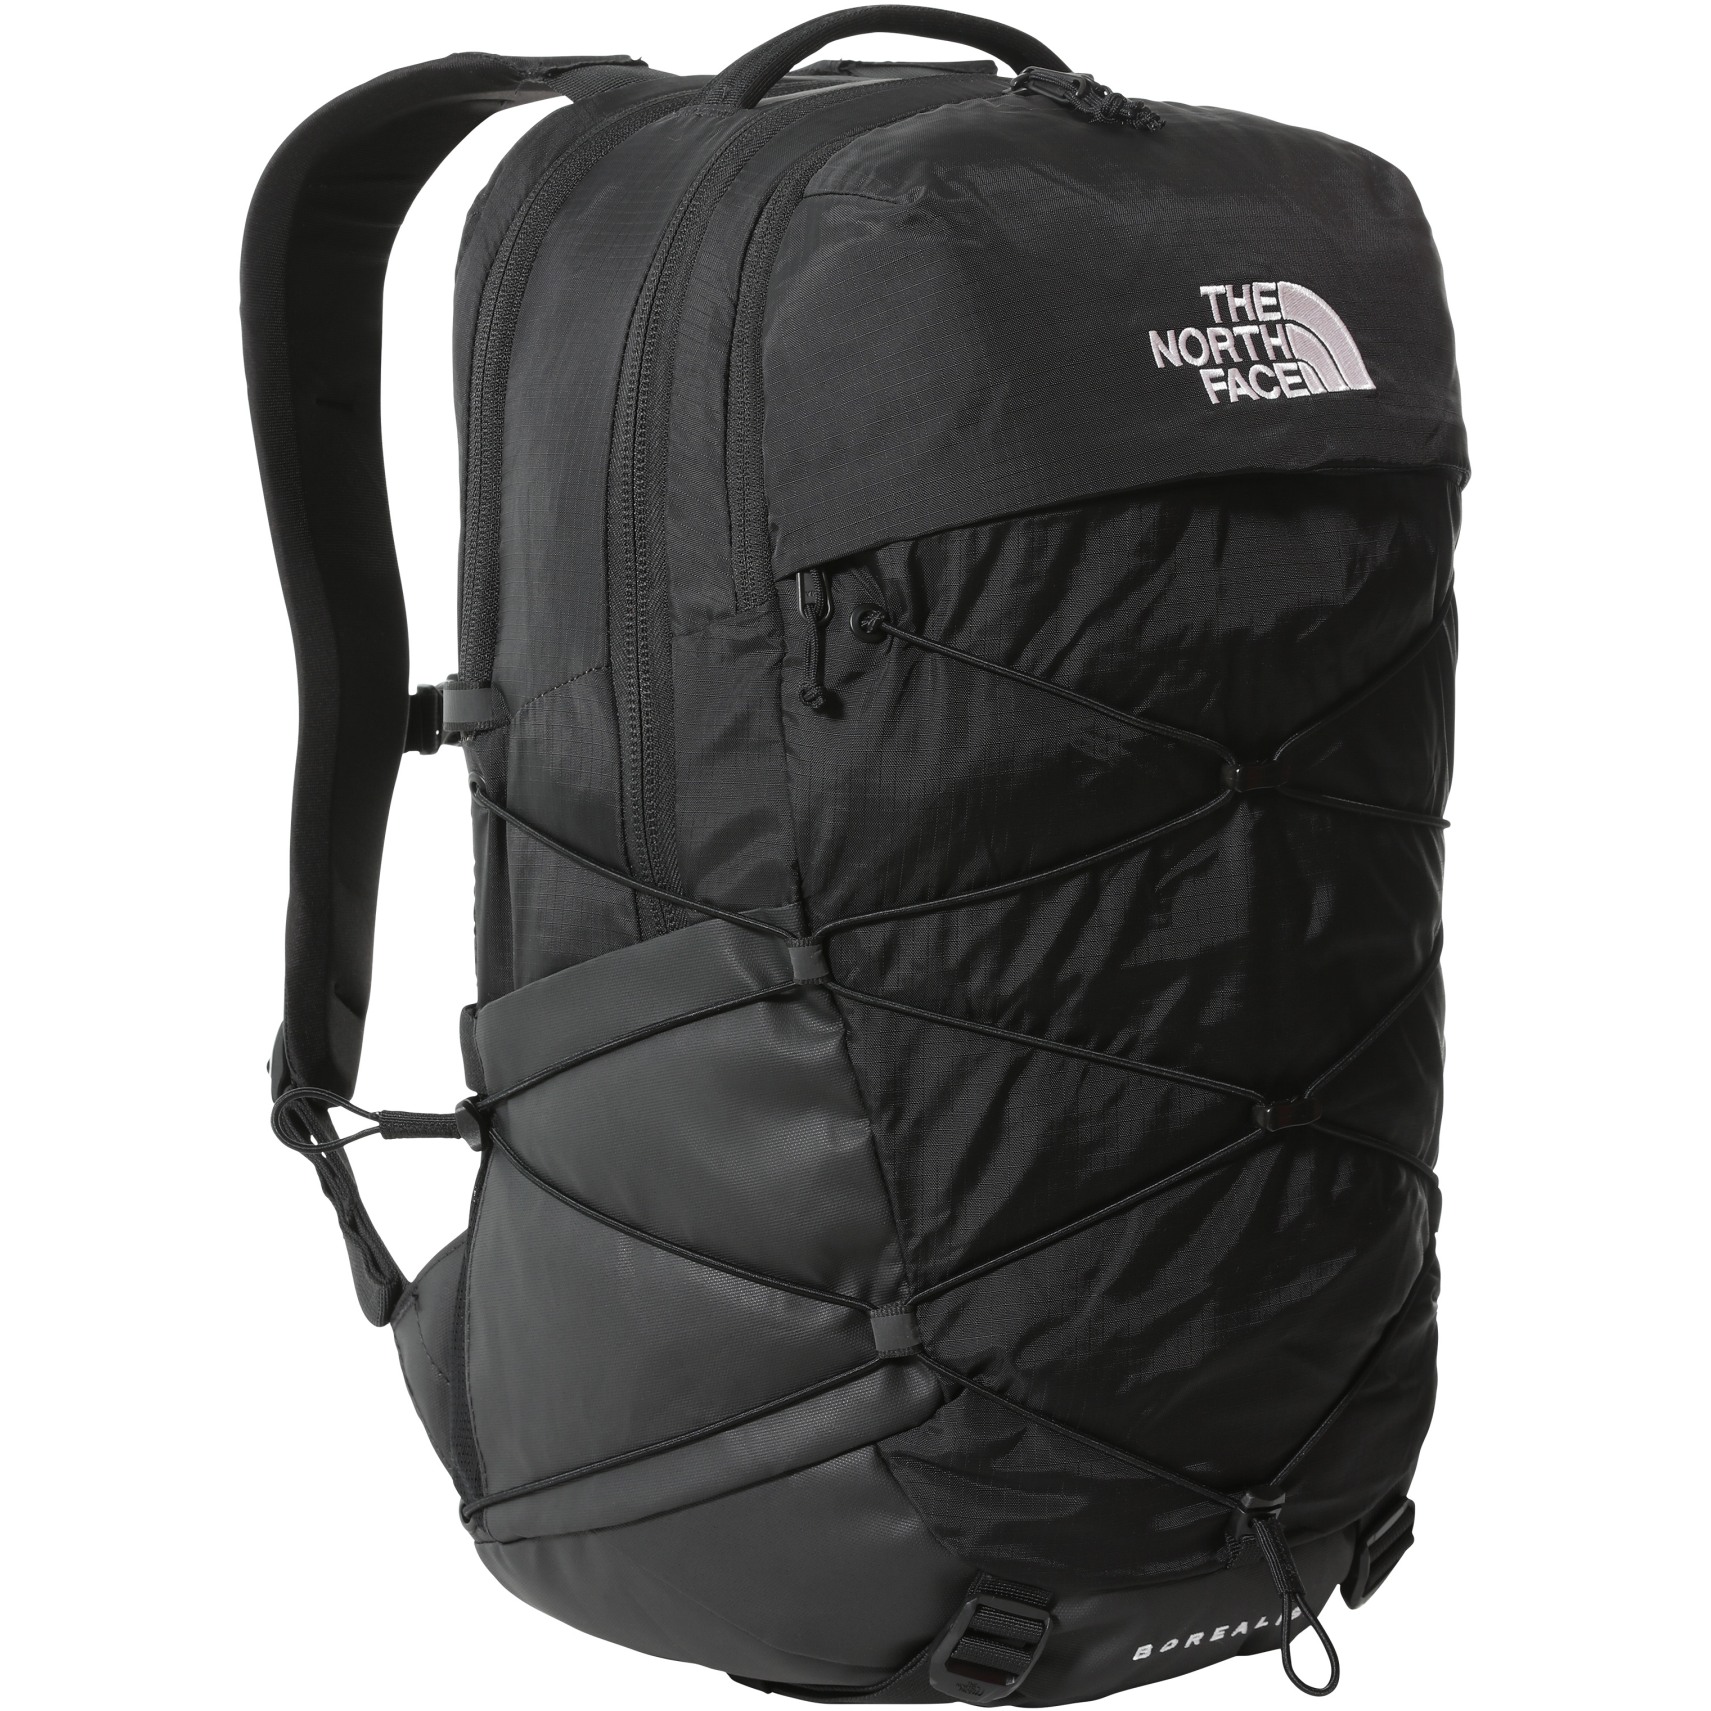 Image of The North Face Borealis 28L Backpack - TNF Black/TNF Black